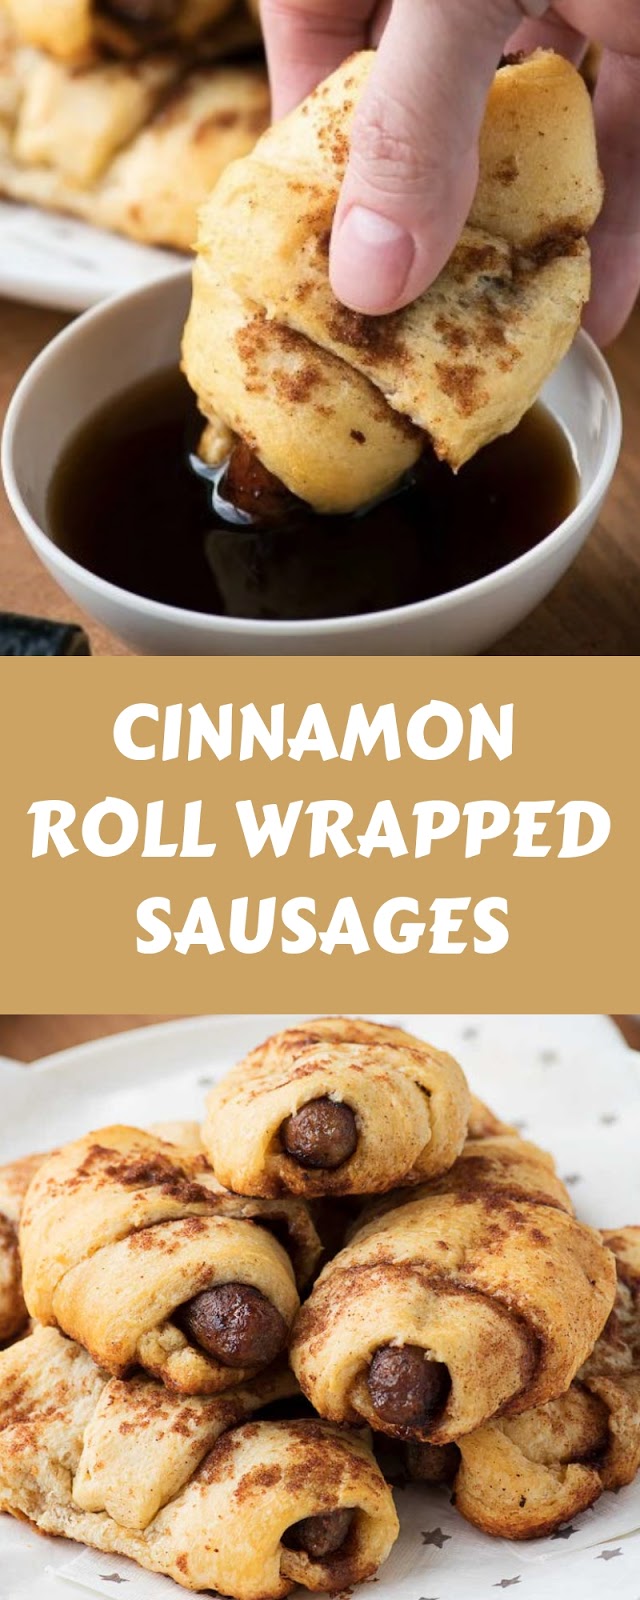 CINNAMON ROLL WRAPPED SAUSAGES